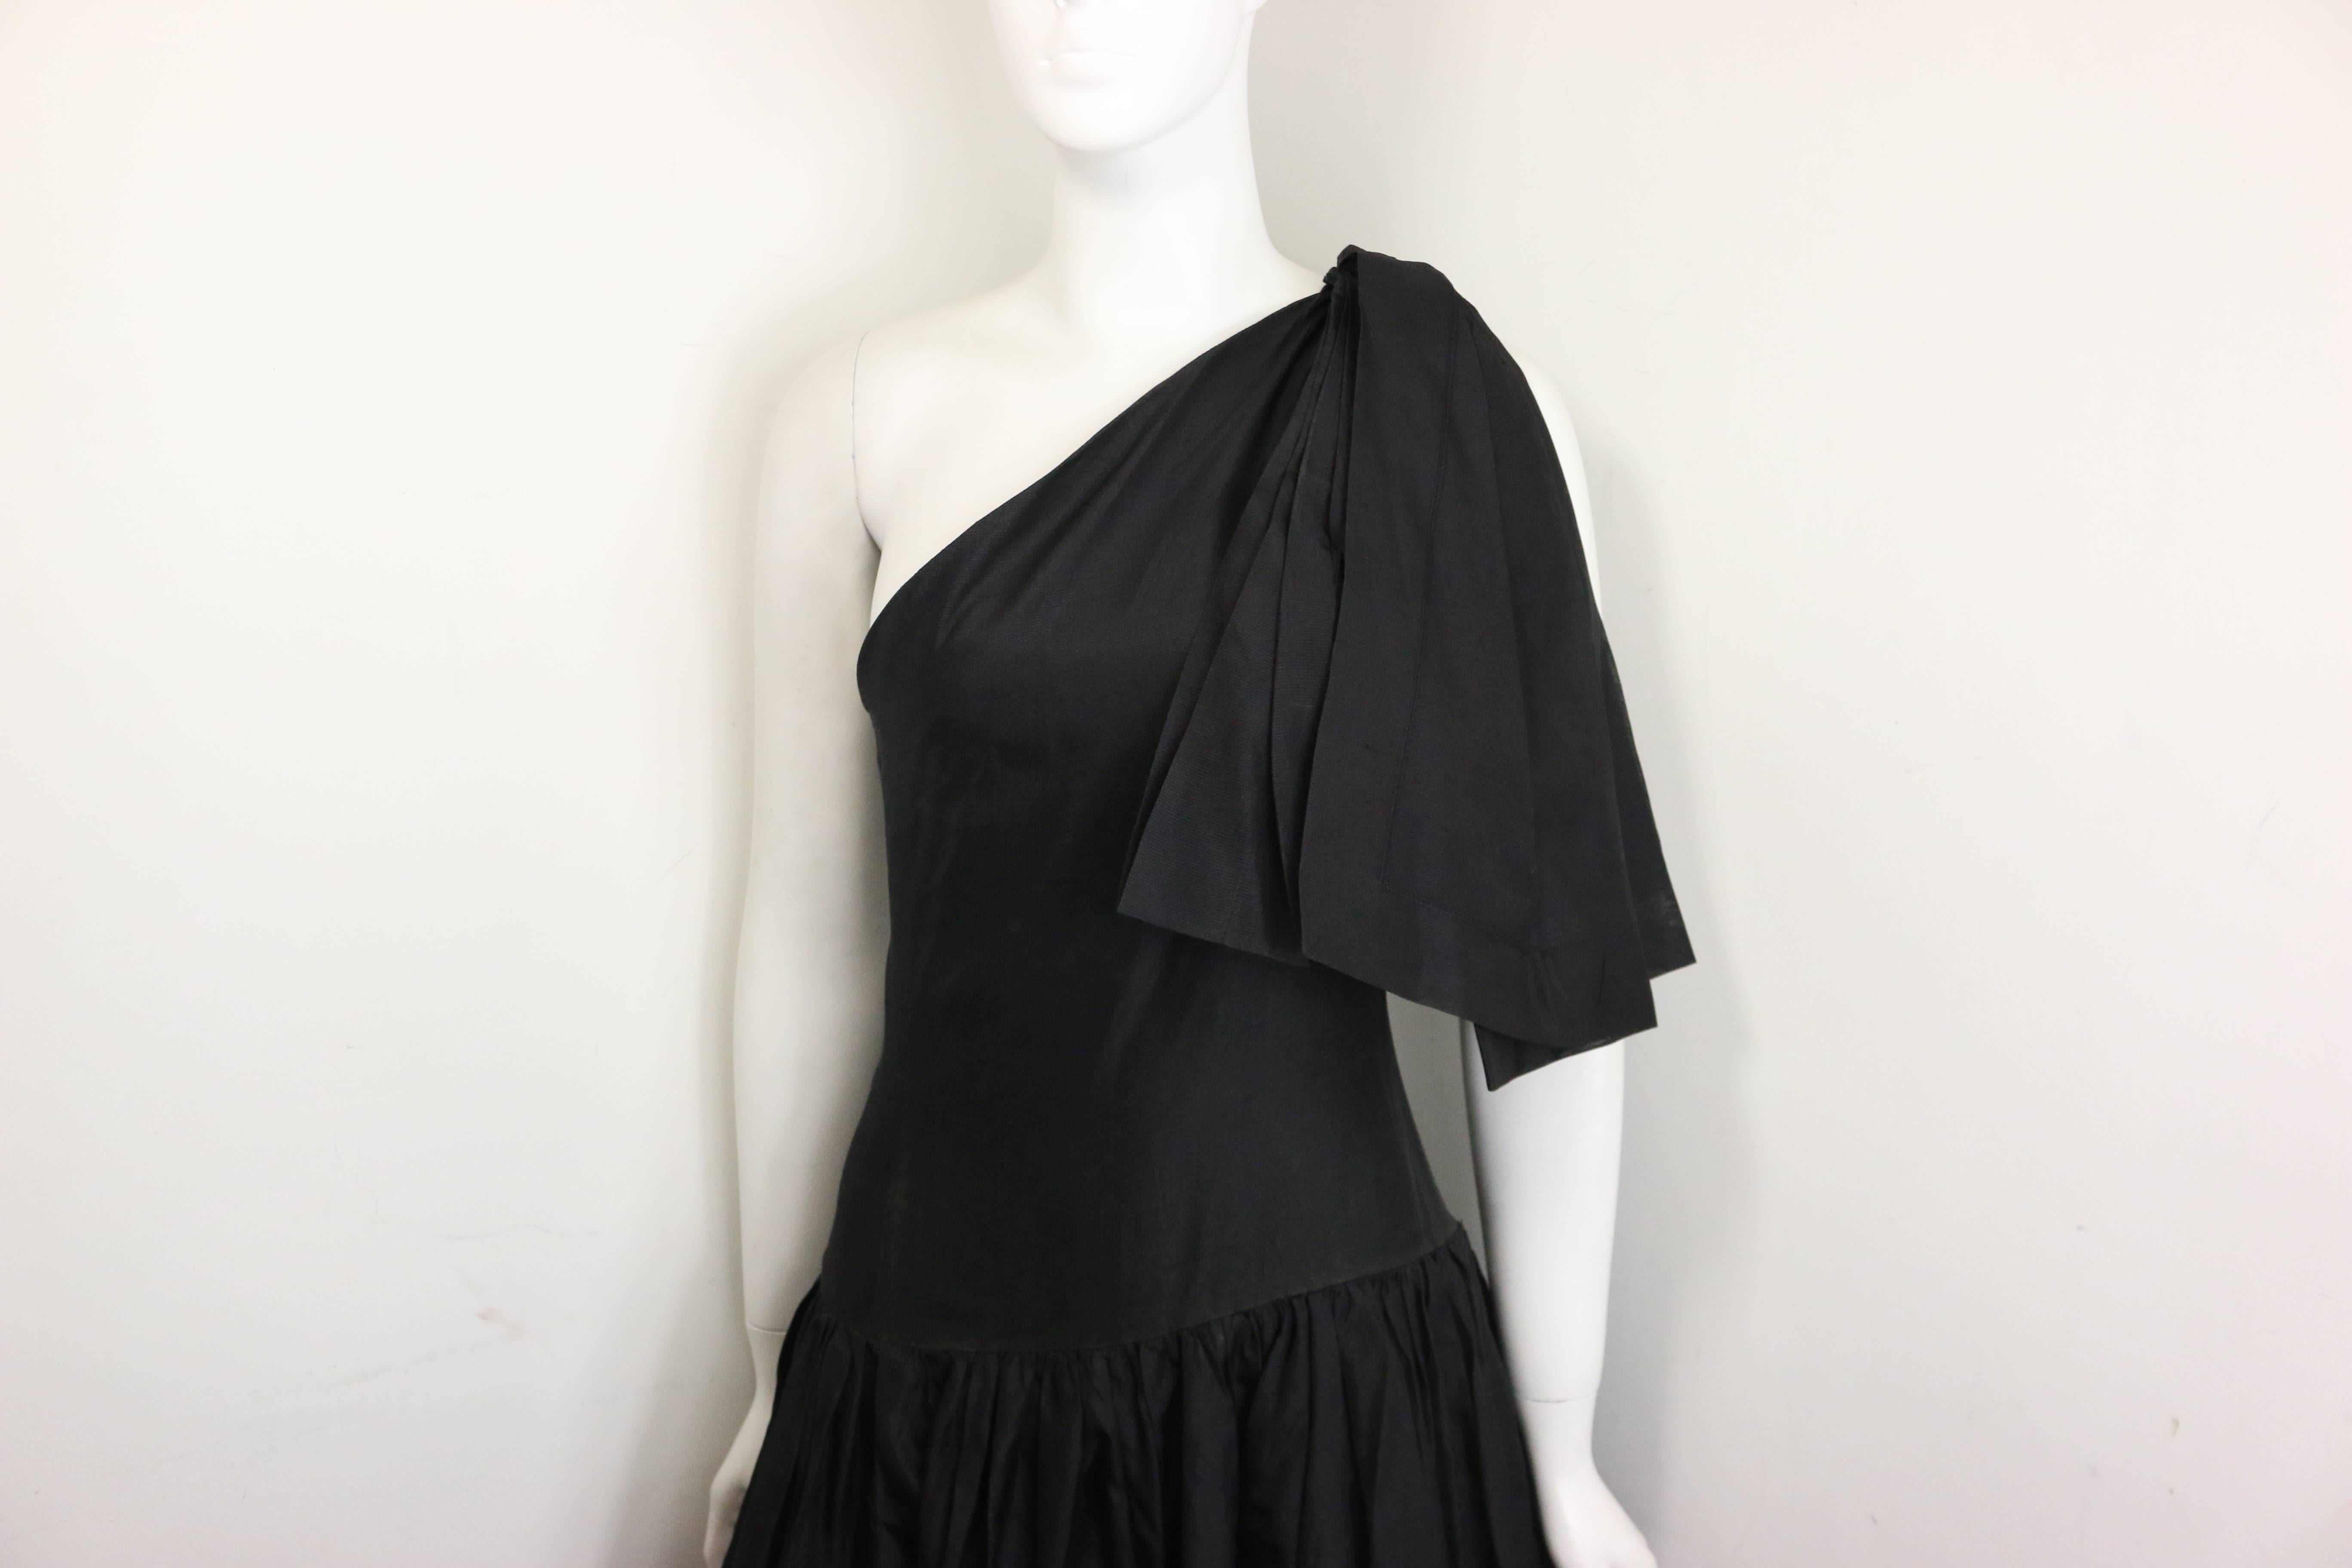 - Vintage Chanel black silk taffeta one shoulder evening gown from 1986 collection. Museum quilty!!!

- Pleated shoulder and bottom part of the dress. 

- Two layers. 

- Side zipper closure. 

- Three hooks closure on the shoulder. 

- Since this